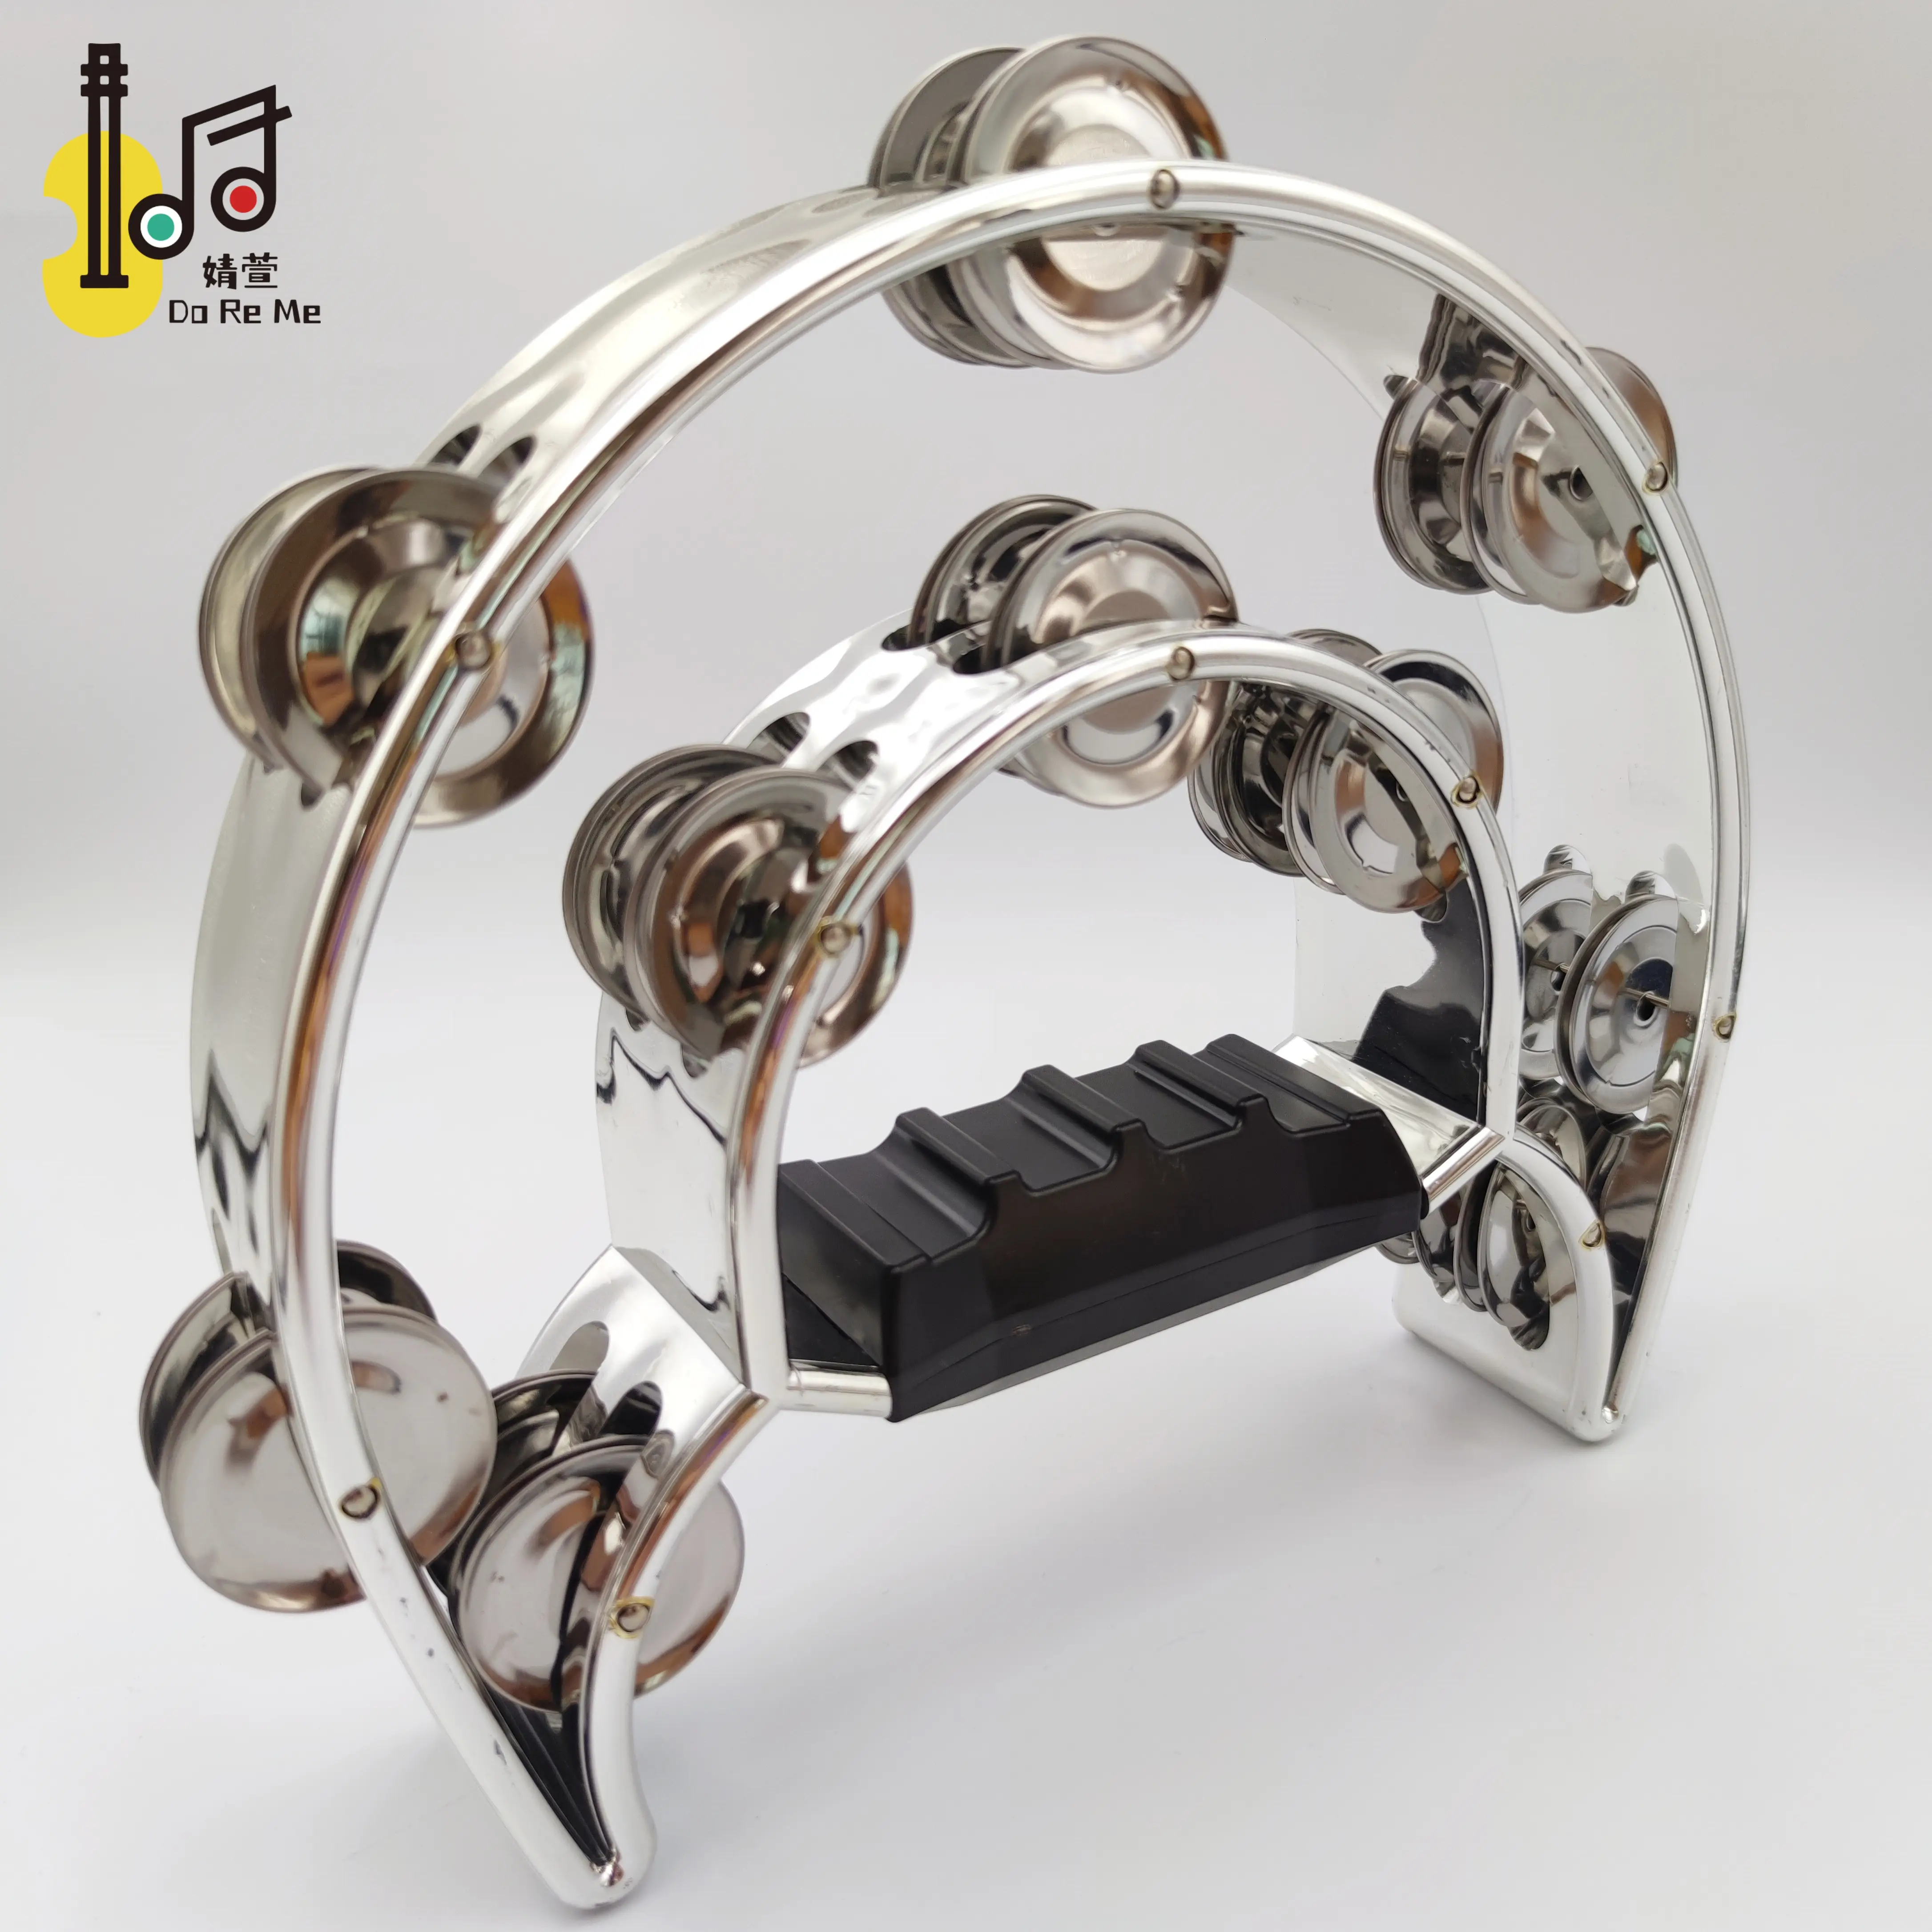 Plastic silver ktv party wedding favor musical instrument tambourine for dance wedding gift for kids playing tambourine toy